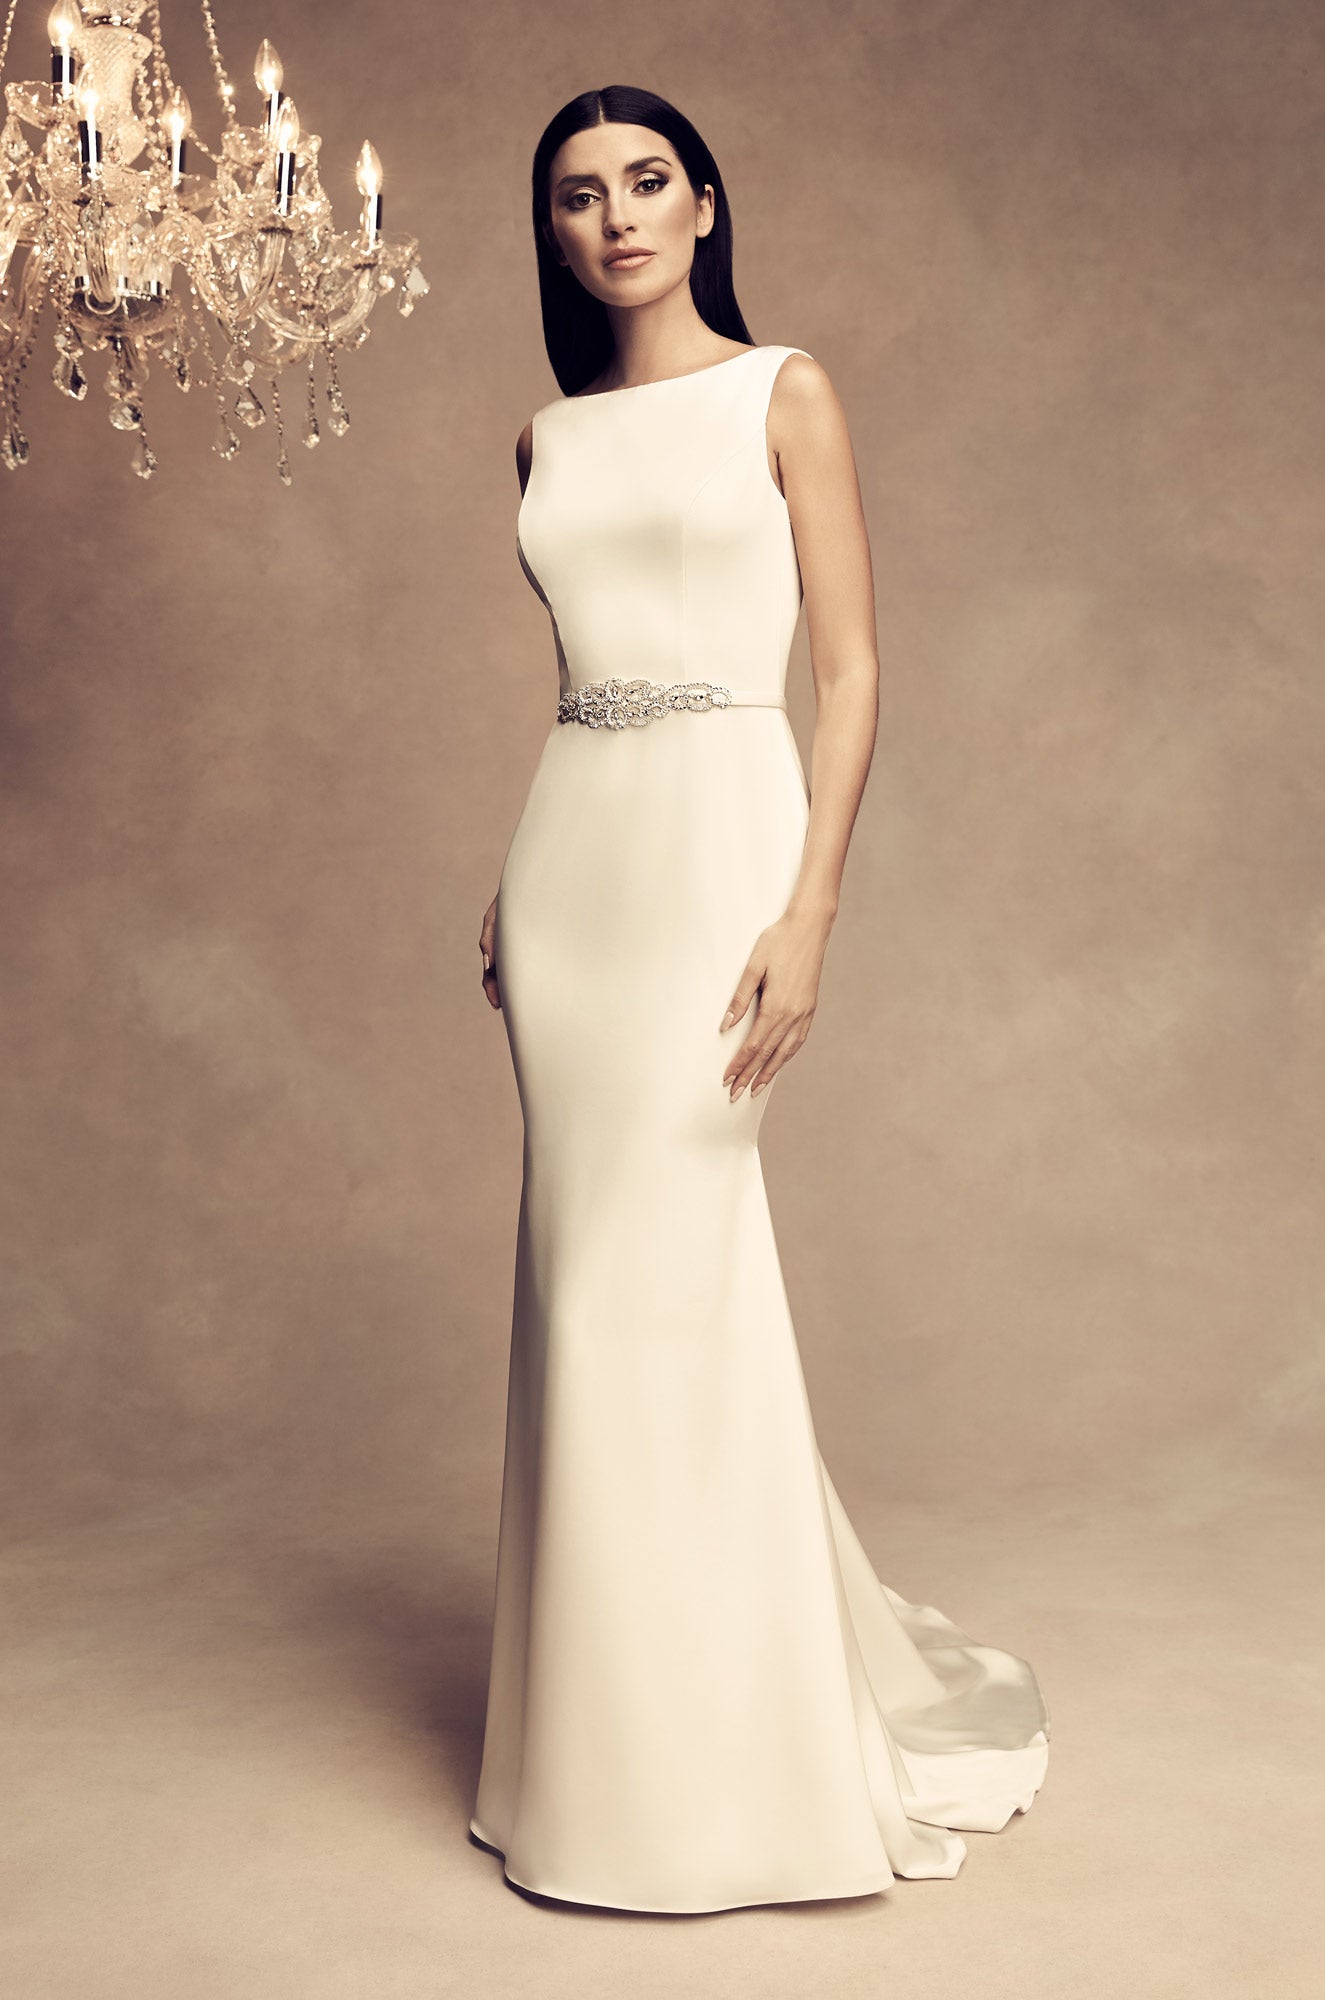 boat neck fit and flare wedding dress